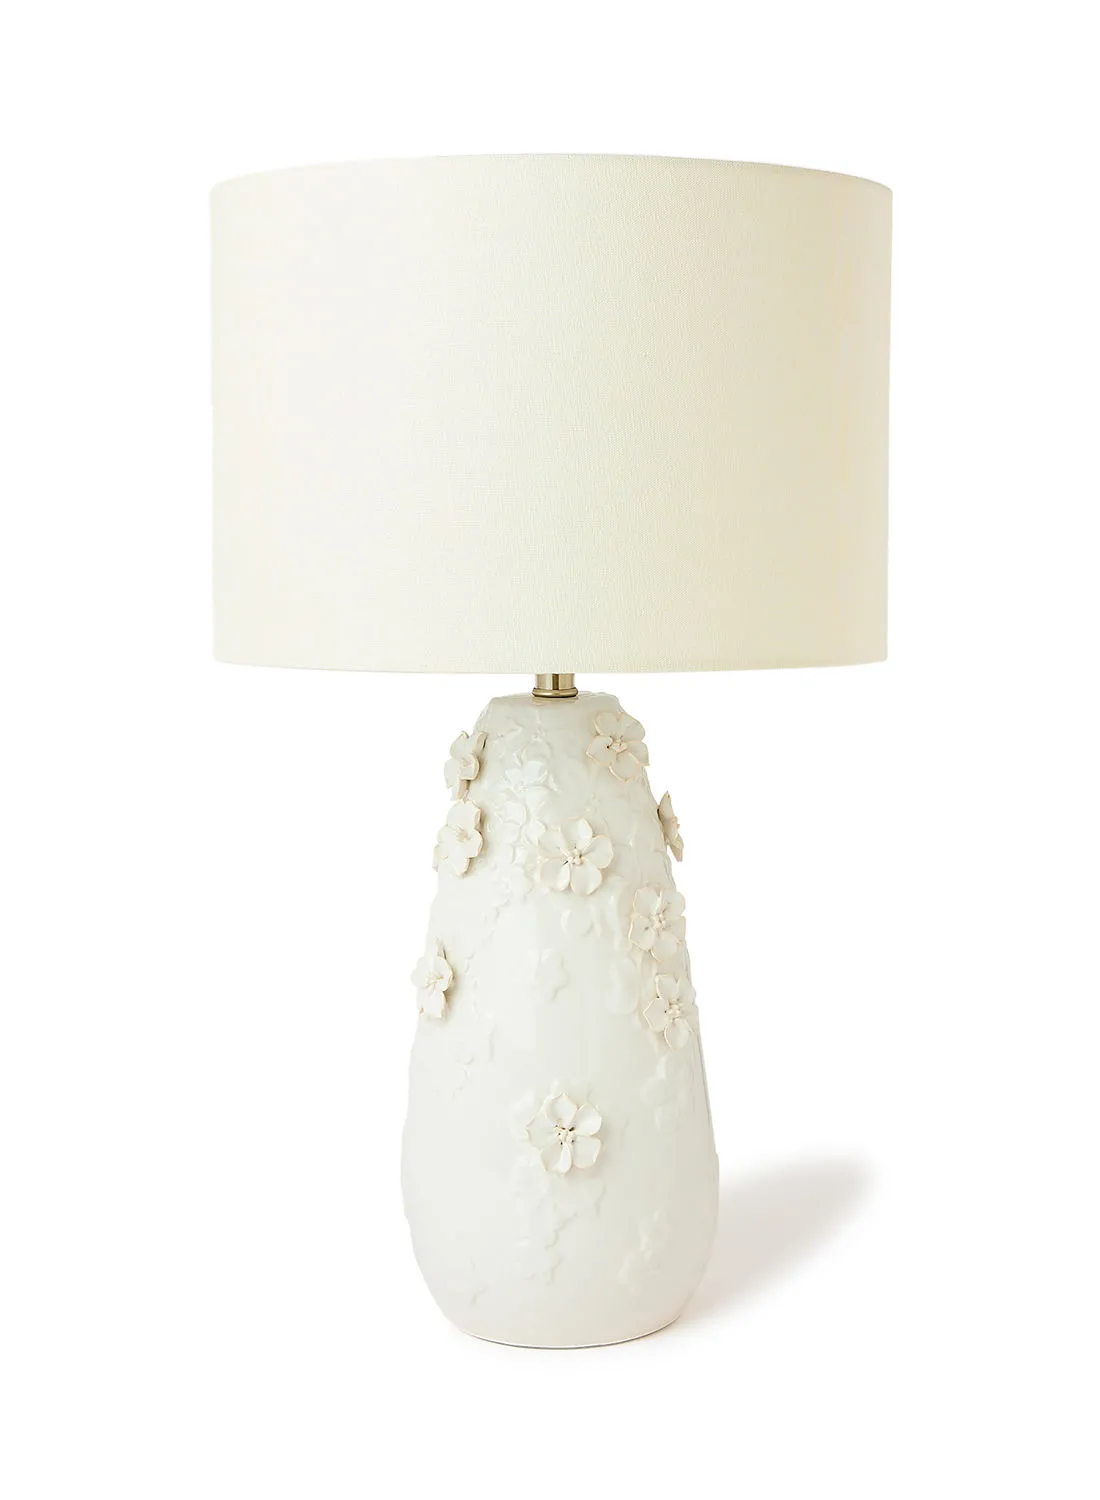 ebb & flow Floral Ceramic Table Lamp | Lampshade Unique Luxury Quality Material For Stylish Homes